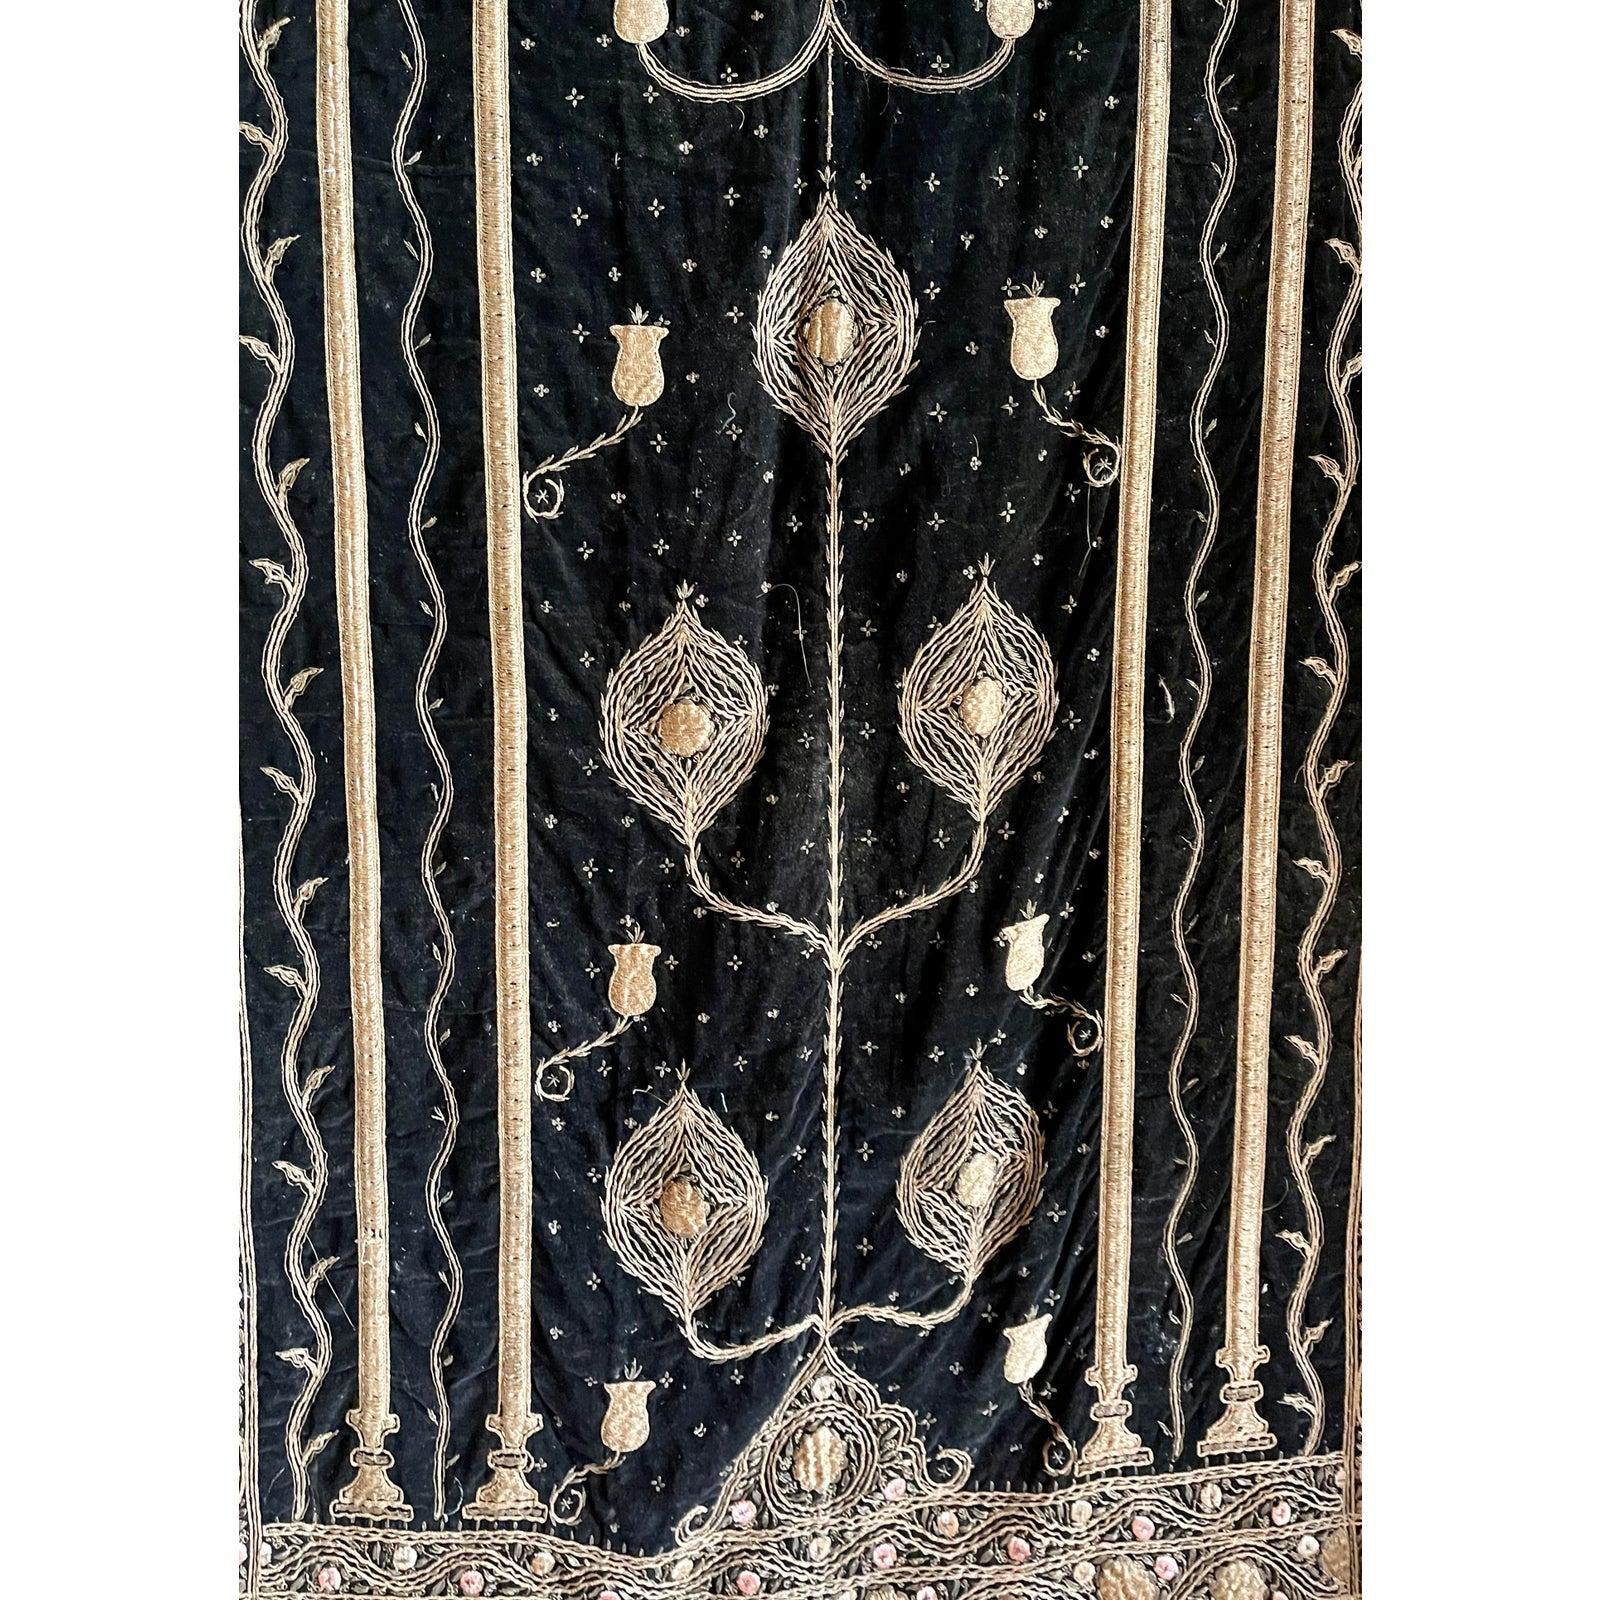 Antique Moroccan Textile Black & Gold Tapestry Rug, 19th Century In Good Condition For Sale In LOS ANGELES, CA